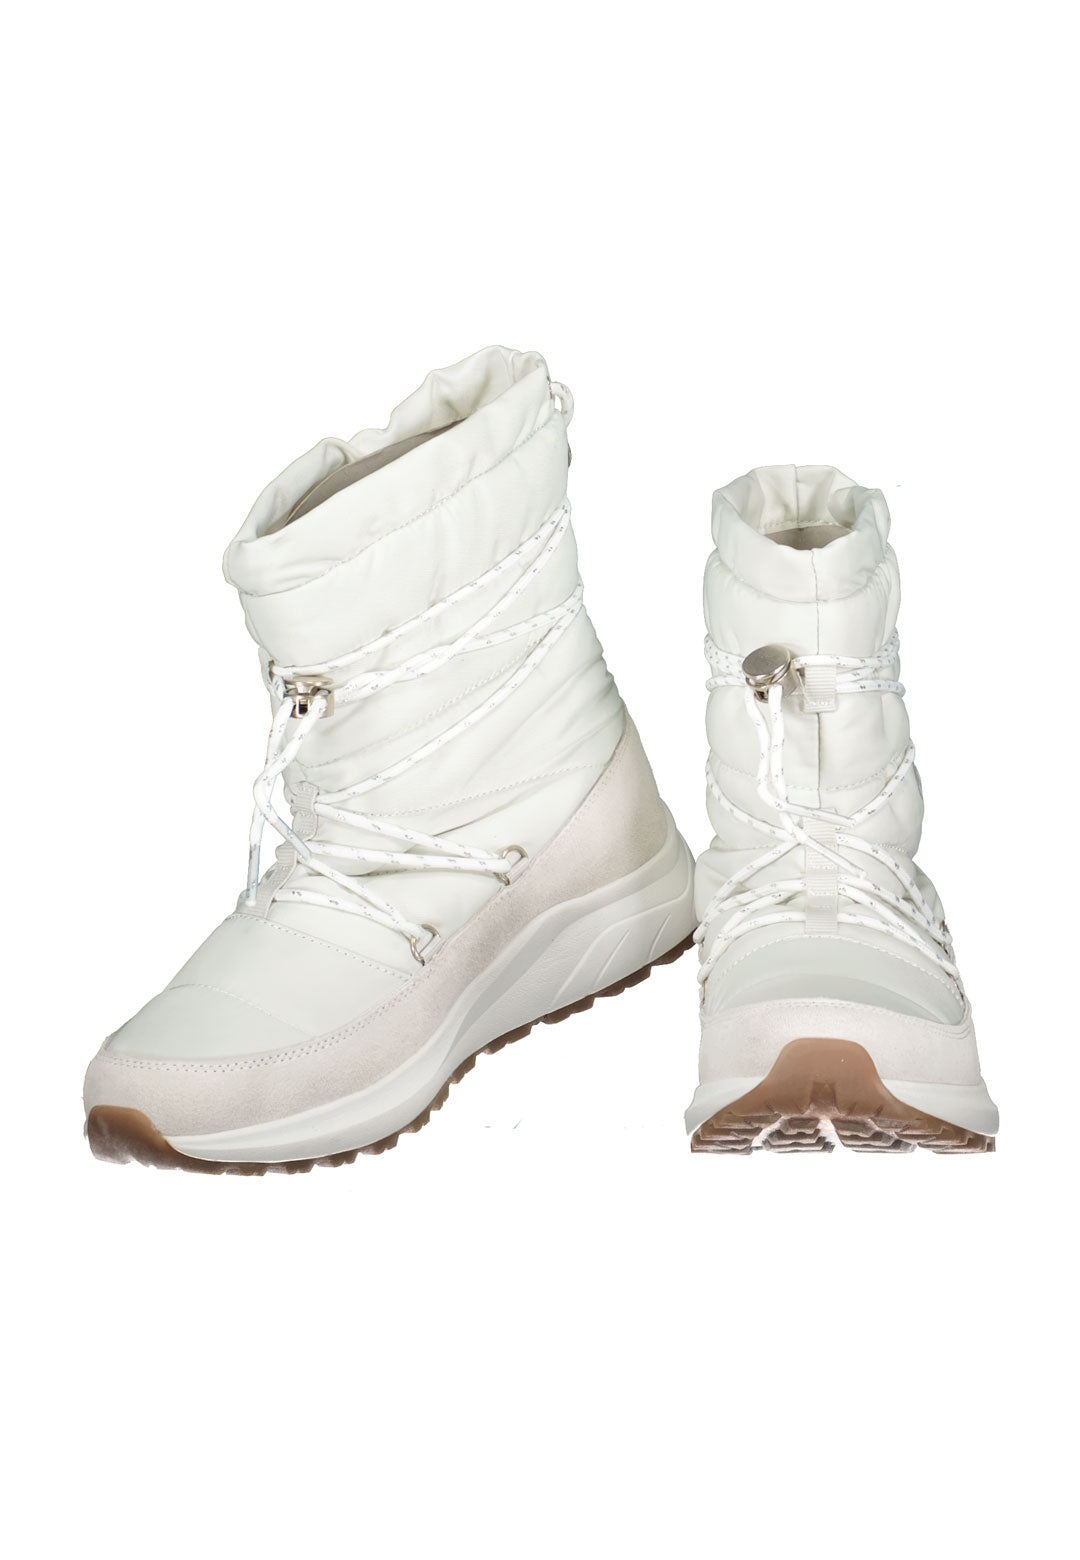 Vail High in Off White Winterstiefel O'Neill   